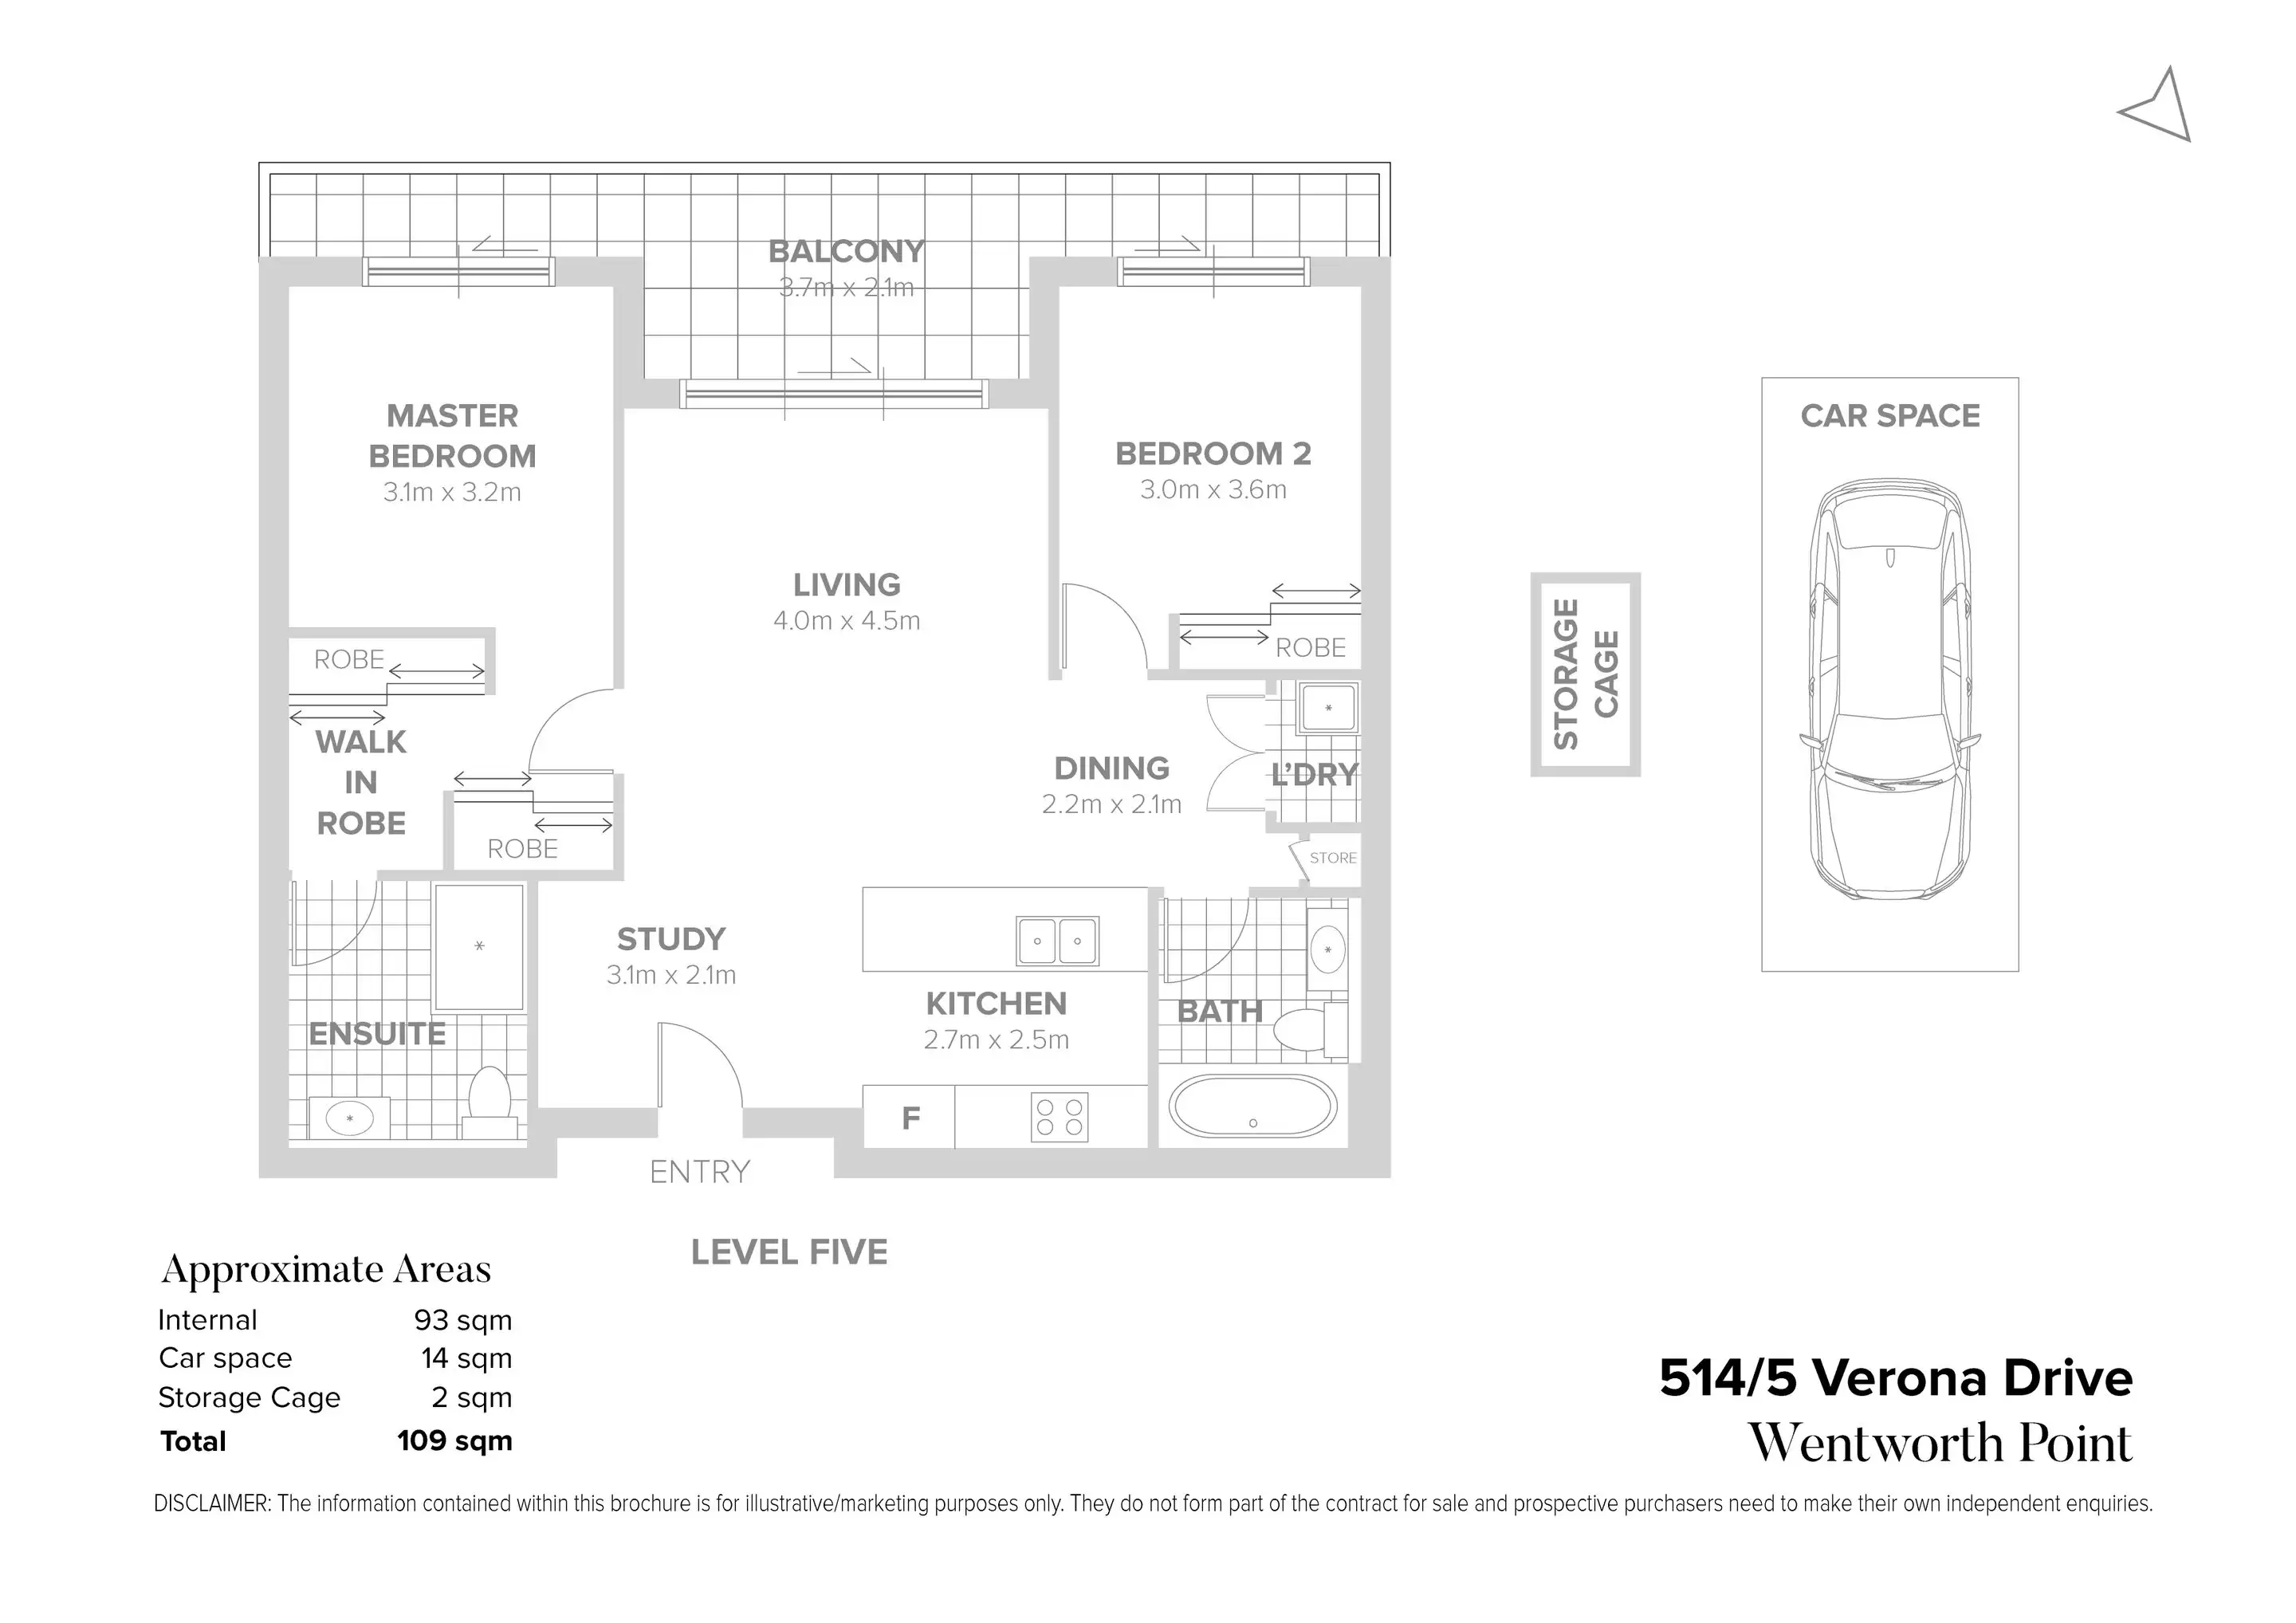 514/5 Verona Drive, Wentworth Point Sold by Chidiac Realty - floorplan